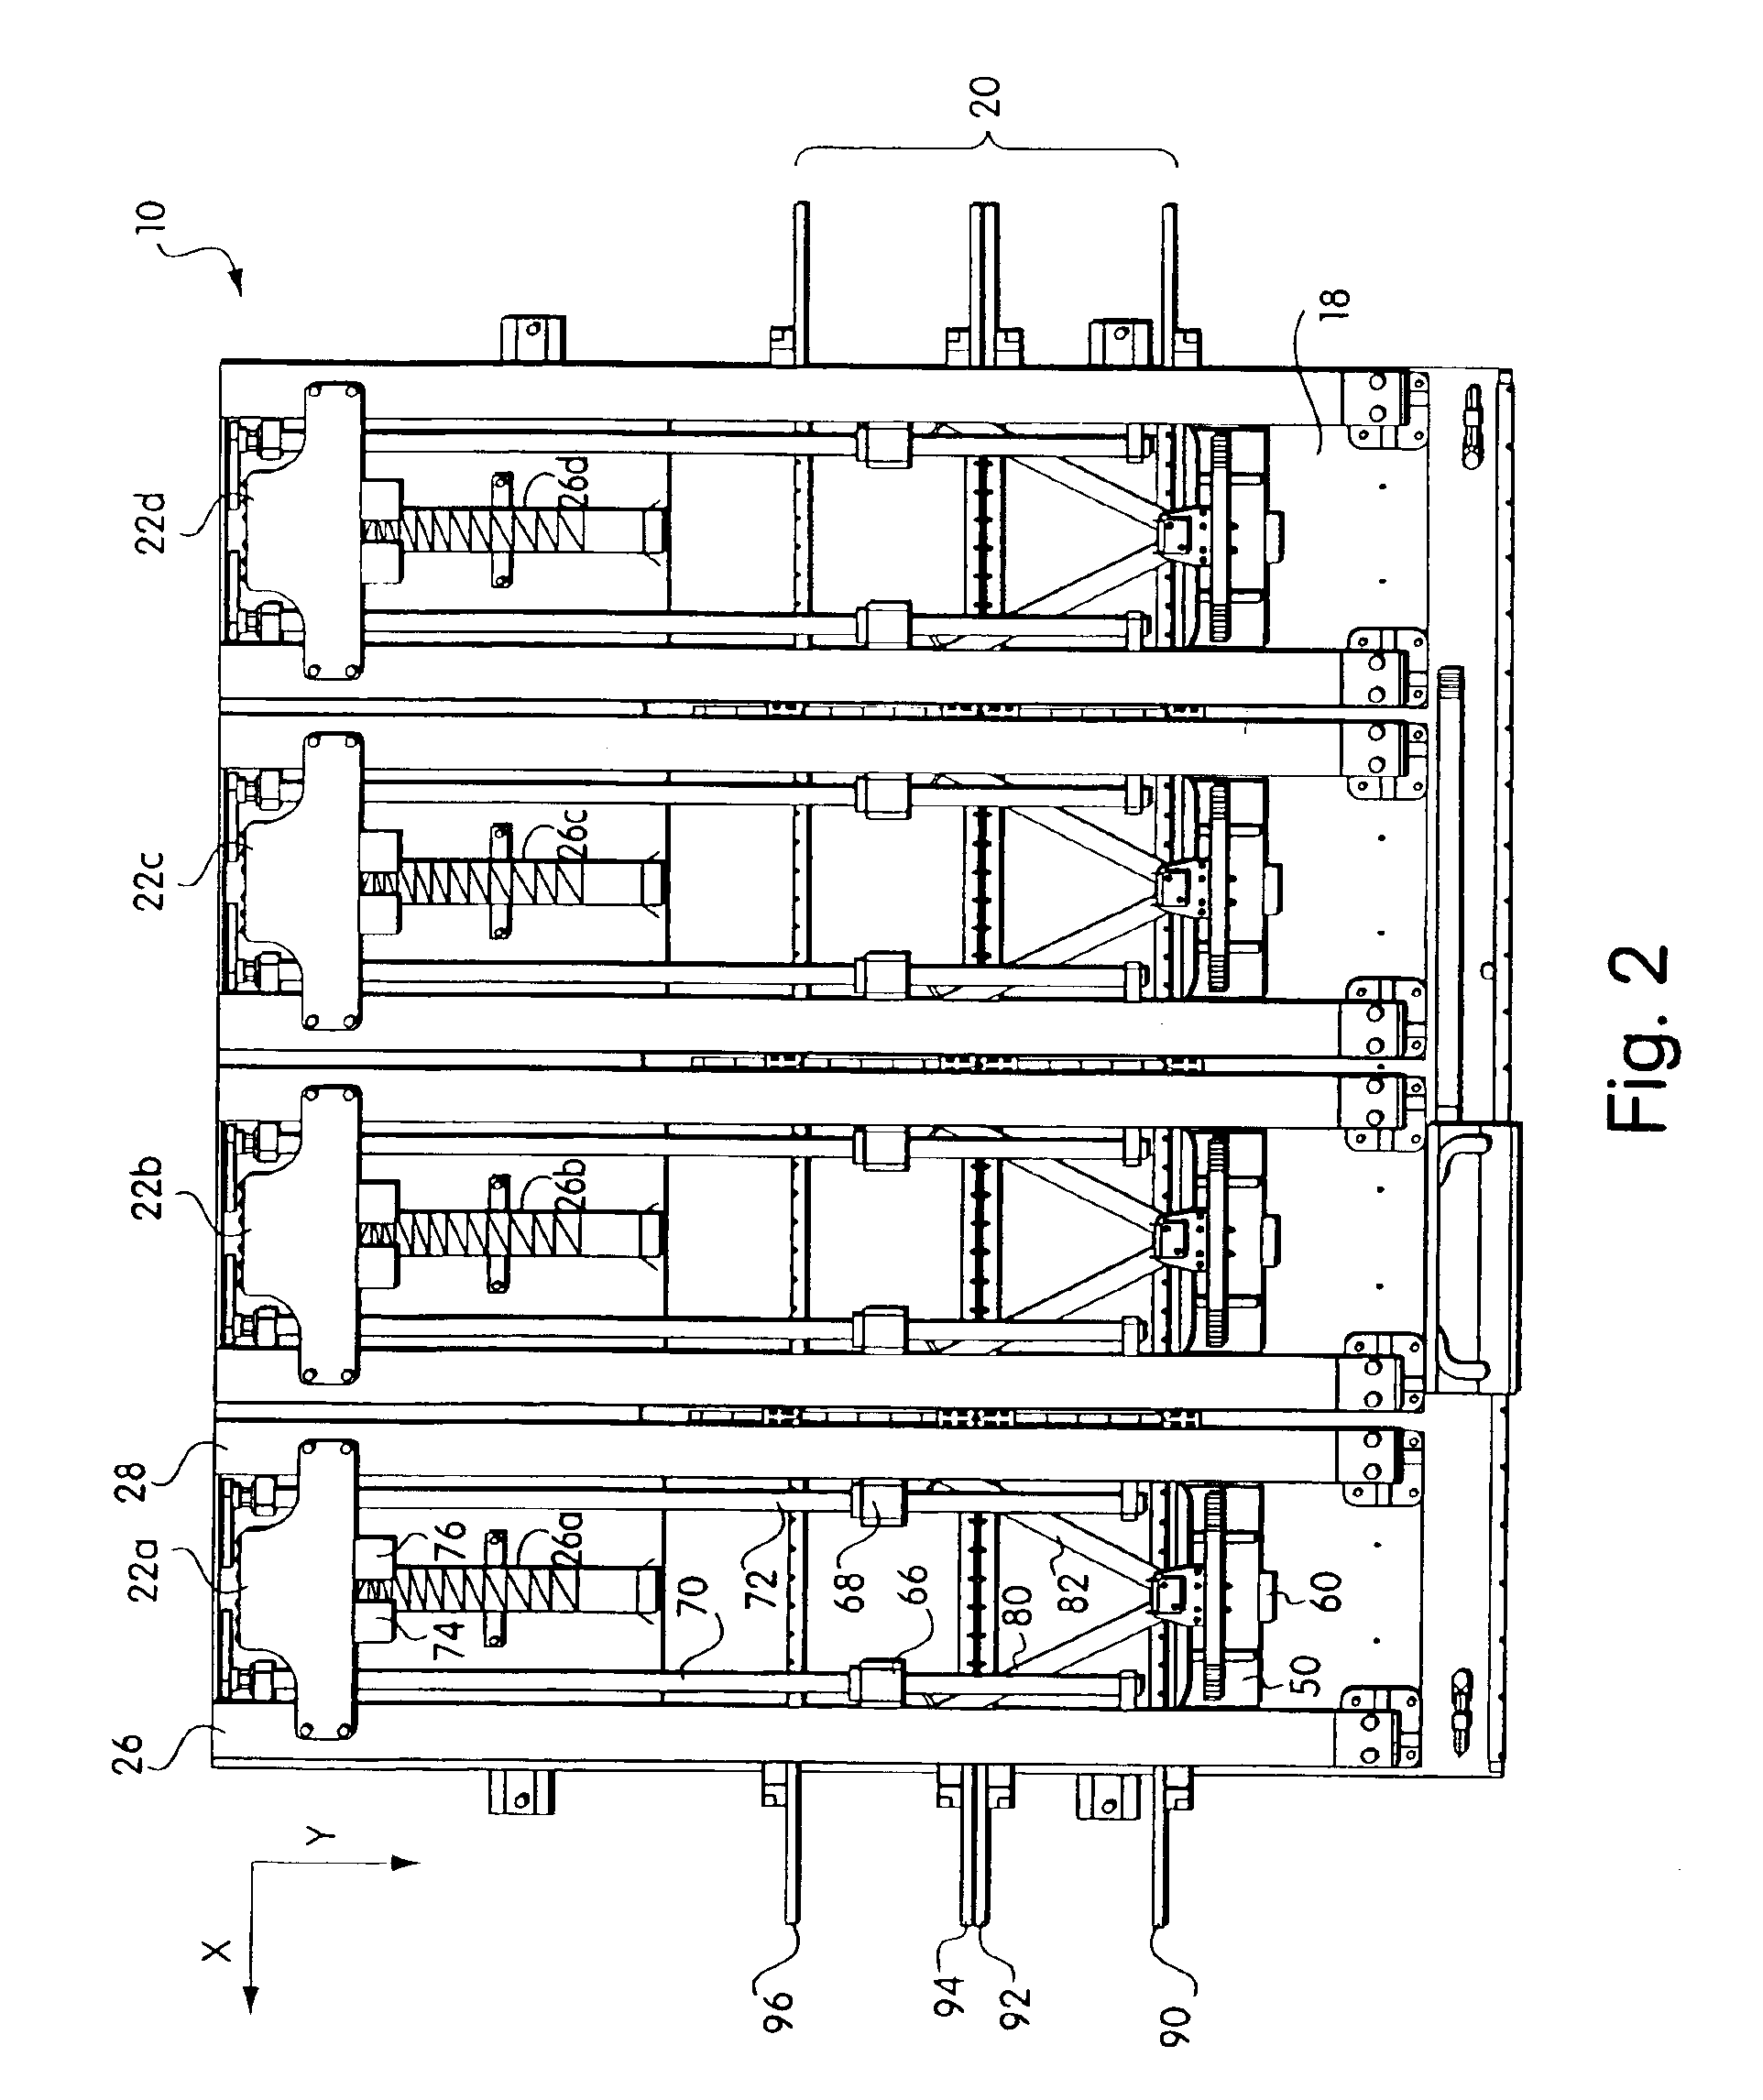 System and method for controlling a conveyor system configuration to accommodate different size substrates